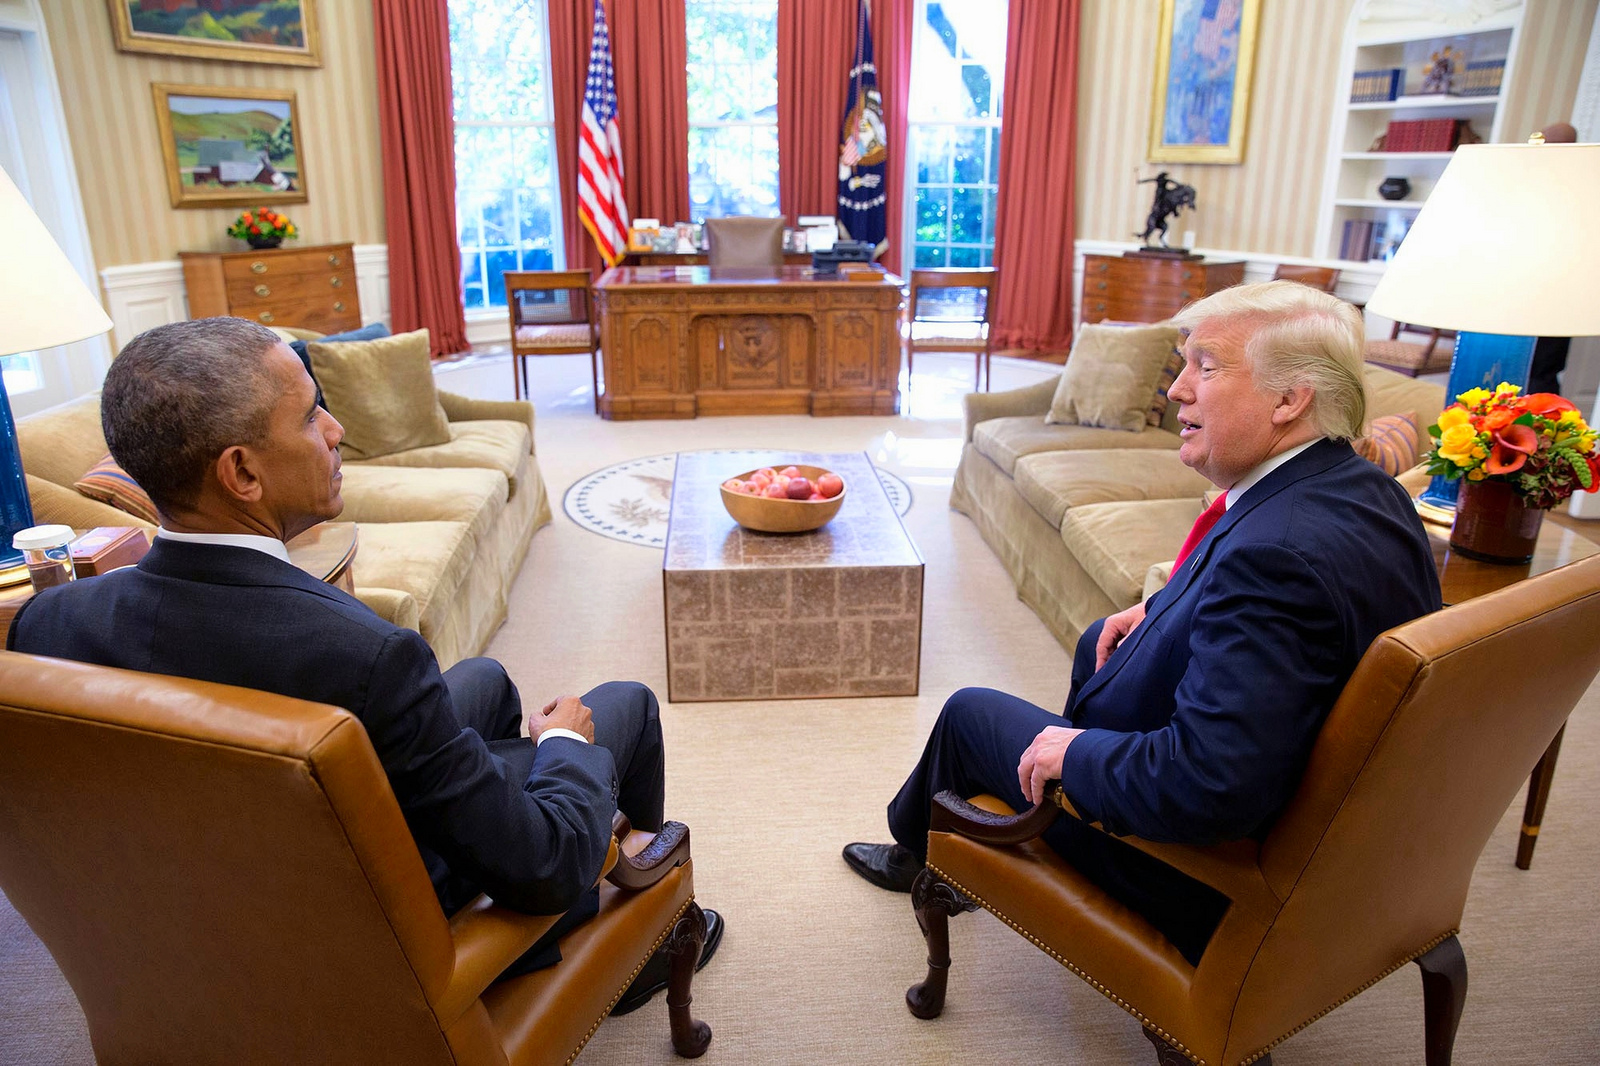 Trump and Obama in the Oval Room - Photo by Karl-Ludwig Poggemann; CC.